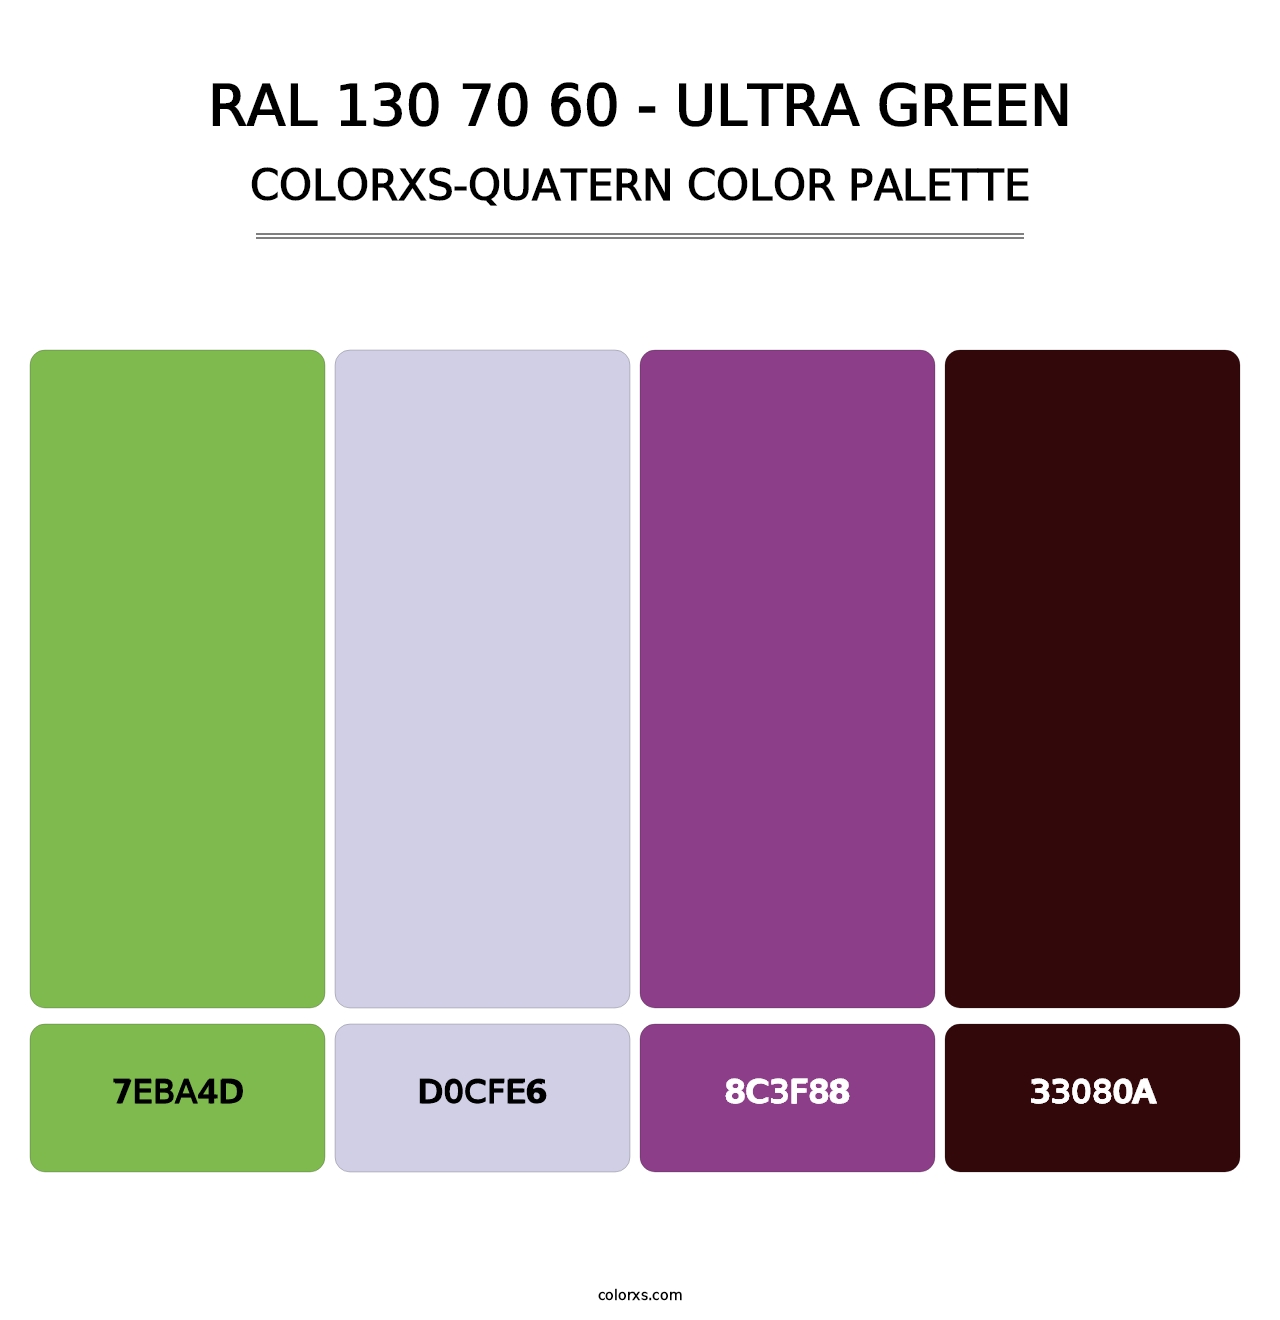 RAL 130 70 60 - Ultra Green - Colorxs Quatern Palette